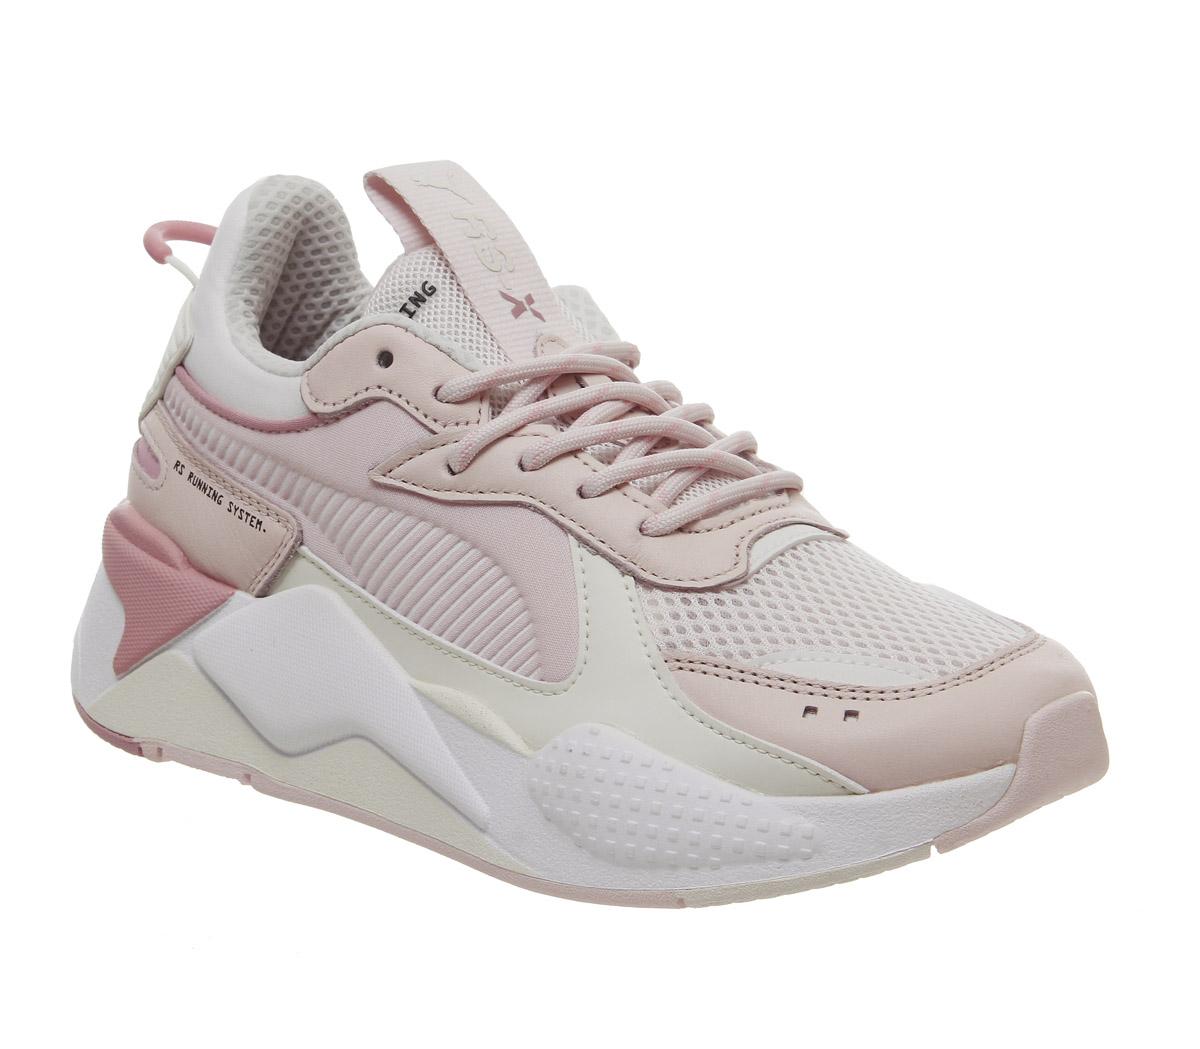 Puma Rs X Tracks Trainers Pink Pink Peach White Hers Trainers